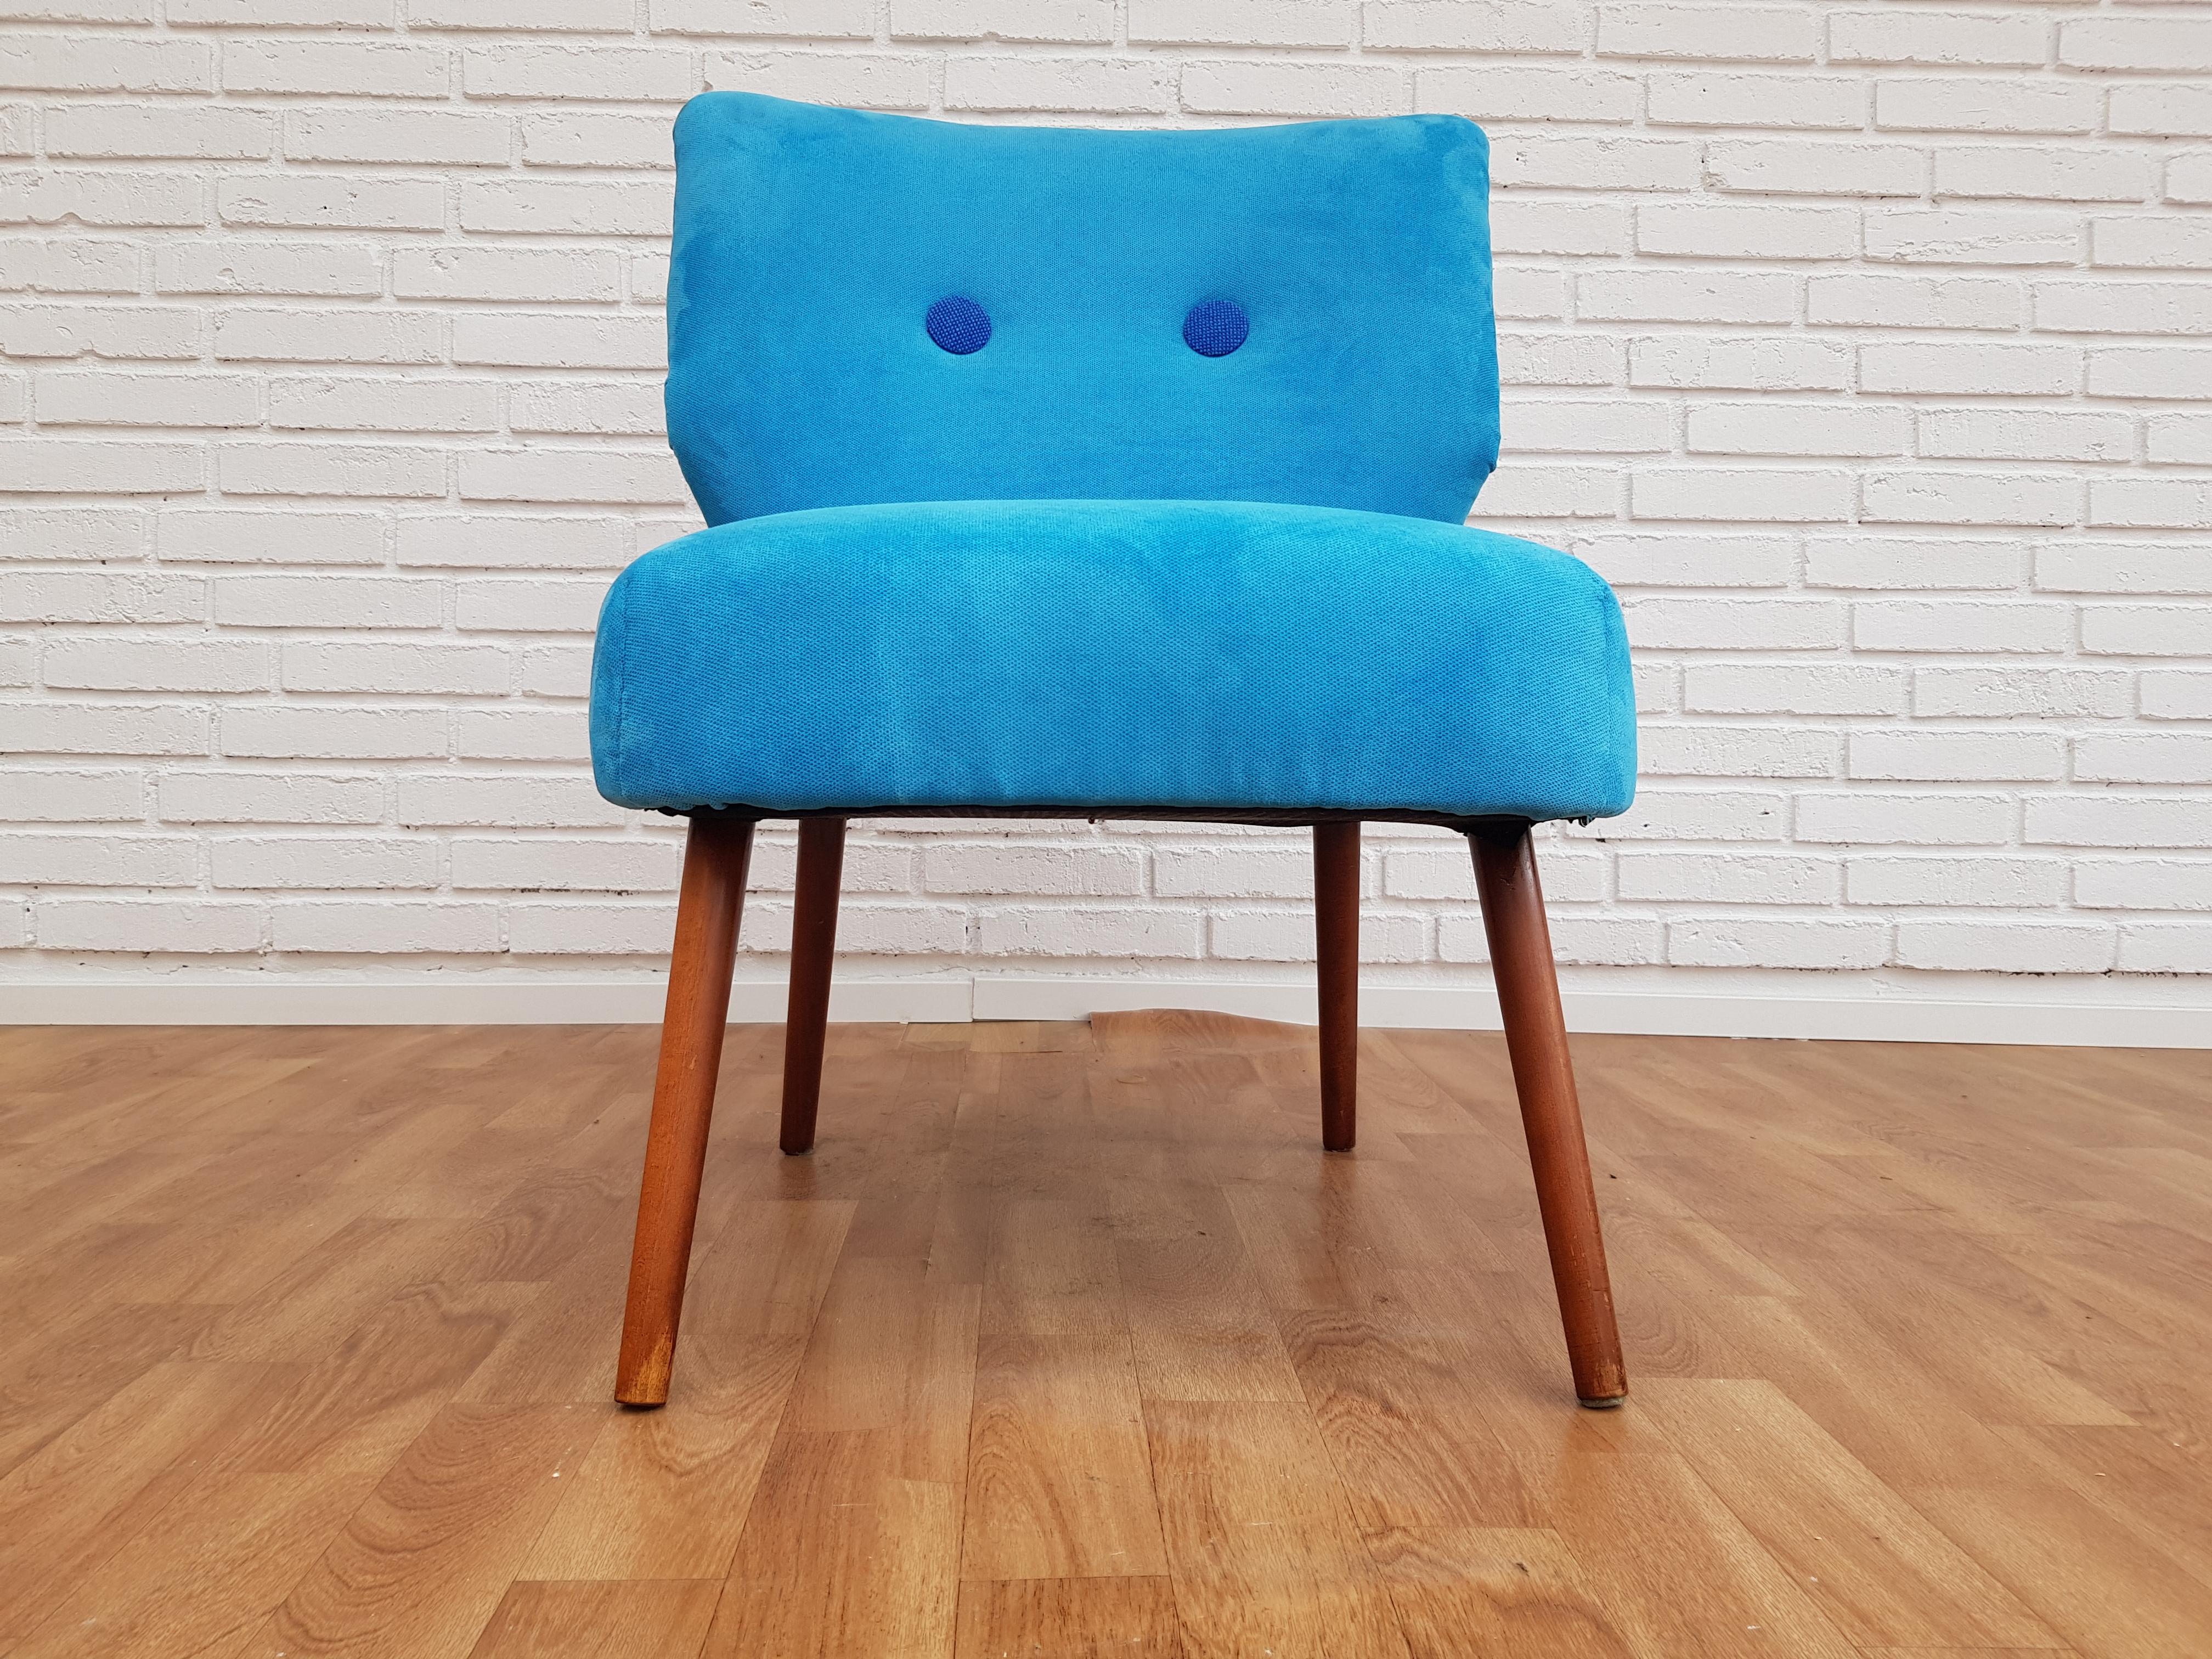 Vintage Armchair, 1970s, Blue Fabric, Kvadrat Wool Buttons, Beechwood In Good Condition For Sale In Tarm, DK